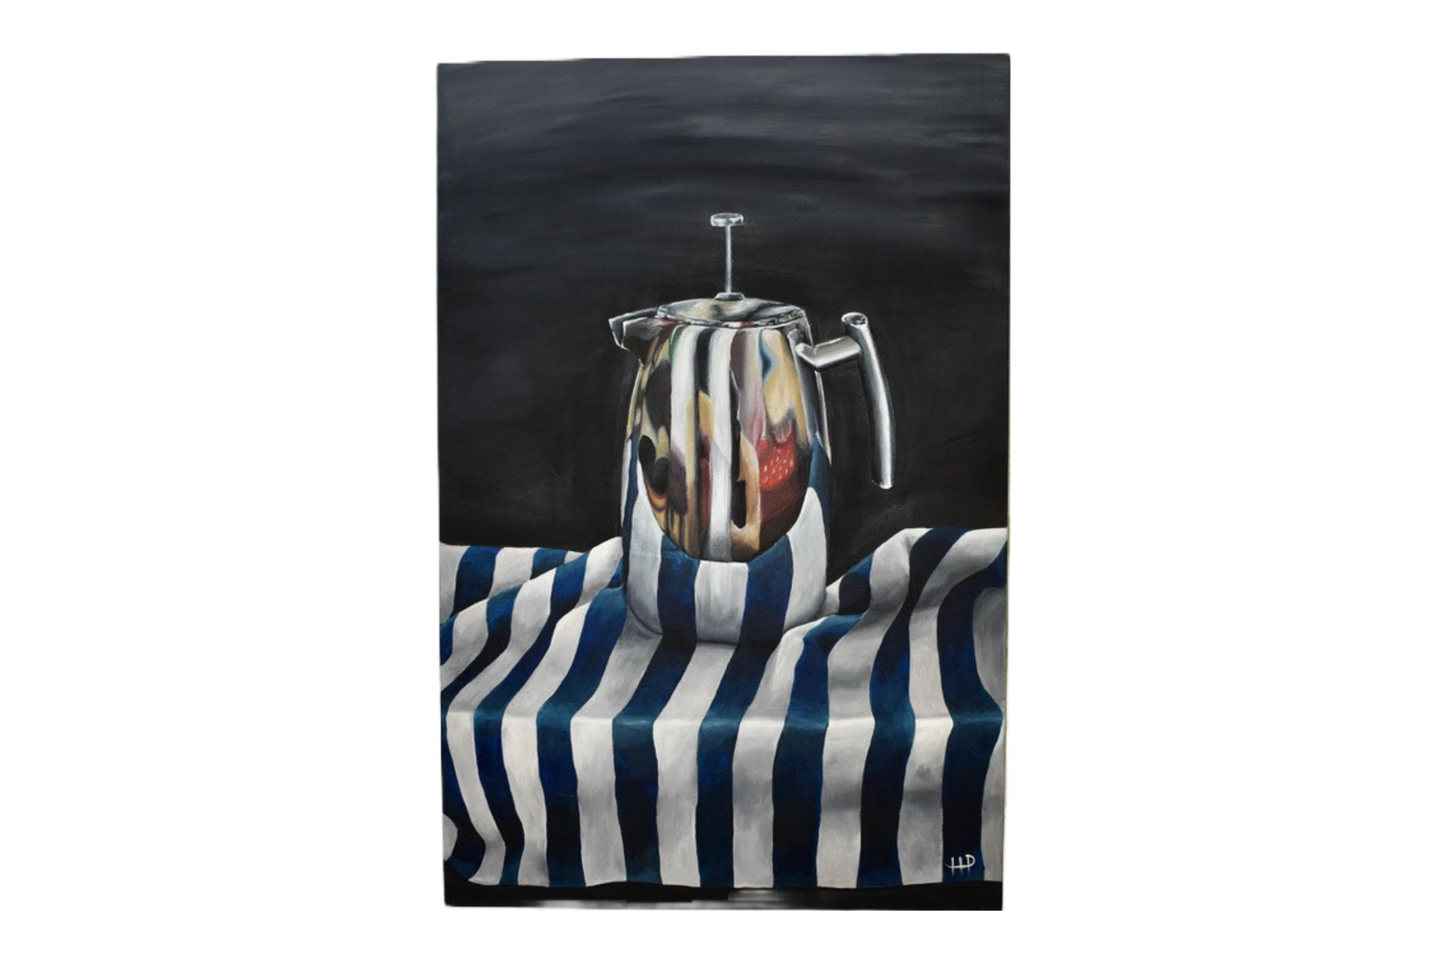 Painting of a coffee pot on a striped cloth against a dark background